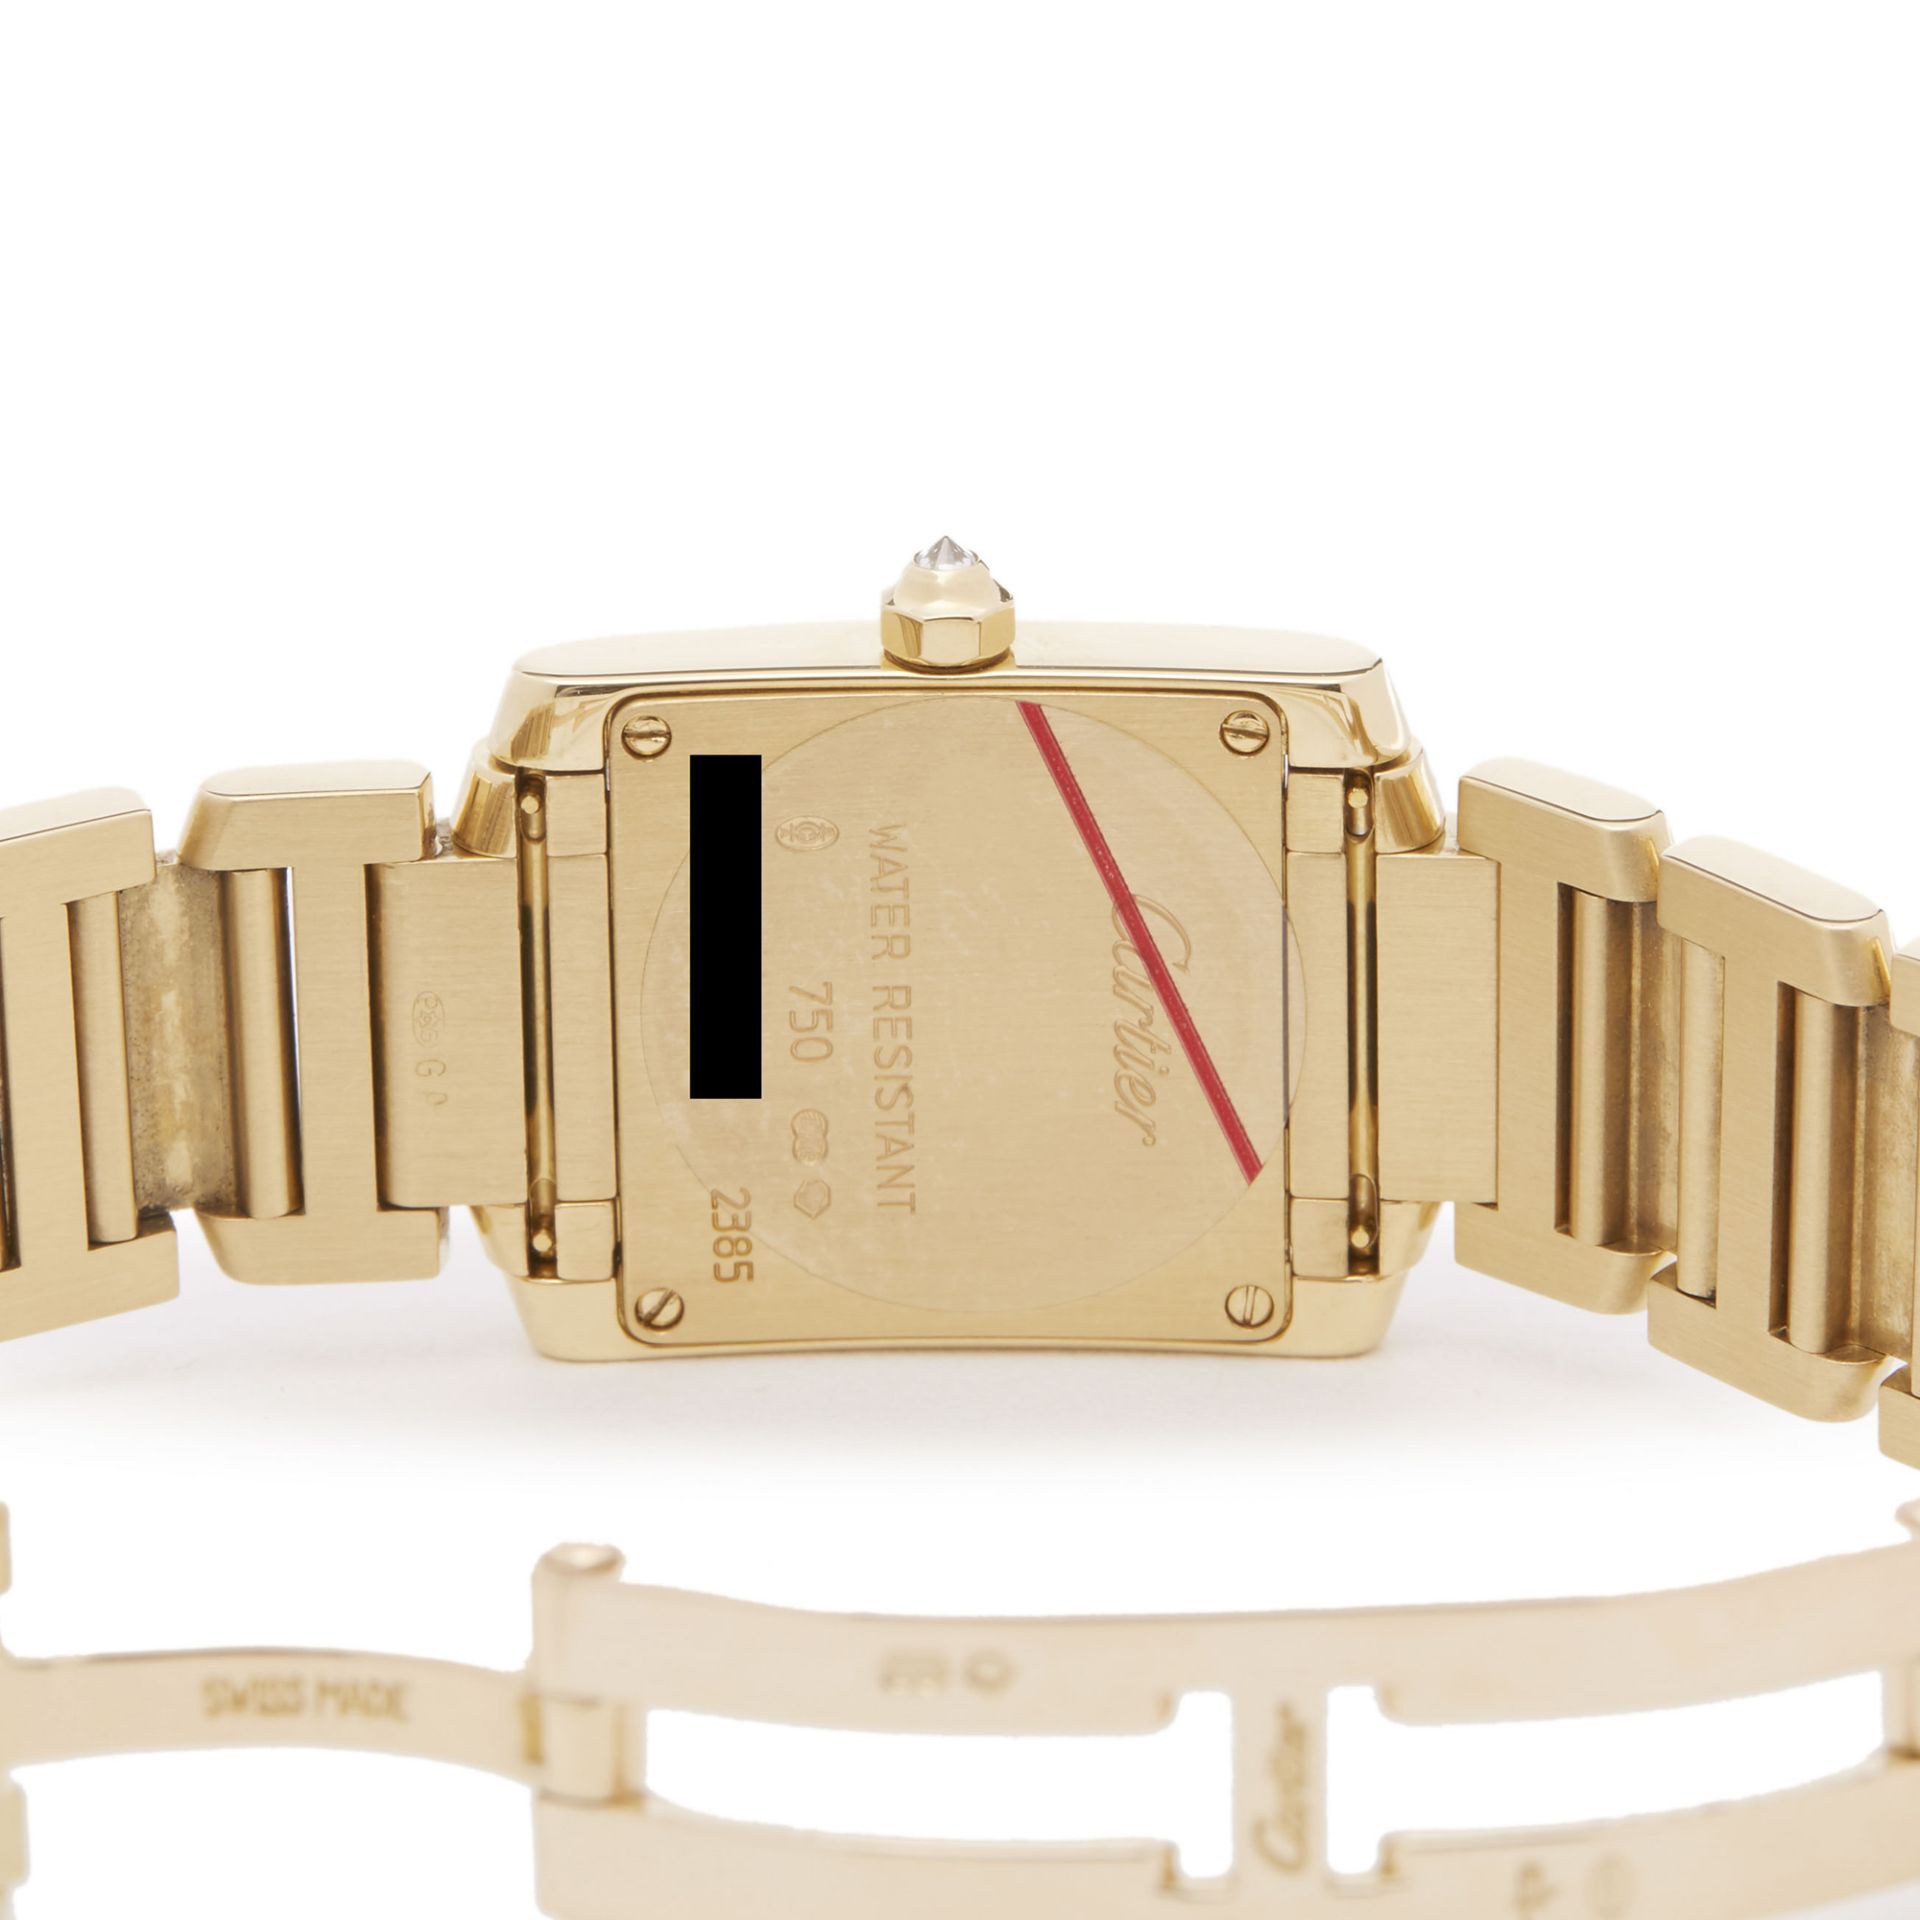 Cartier Tank Francaise Diamond 18k Yellow Gold - WE1001RG or 2385 - Image 5 of 8